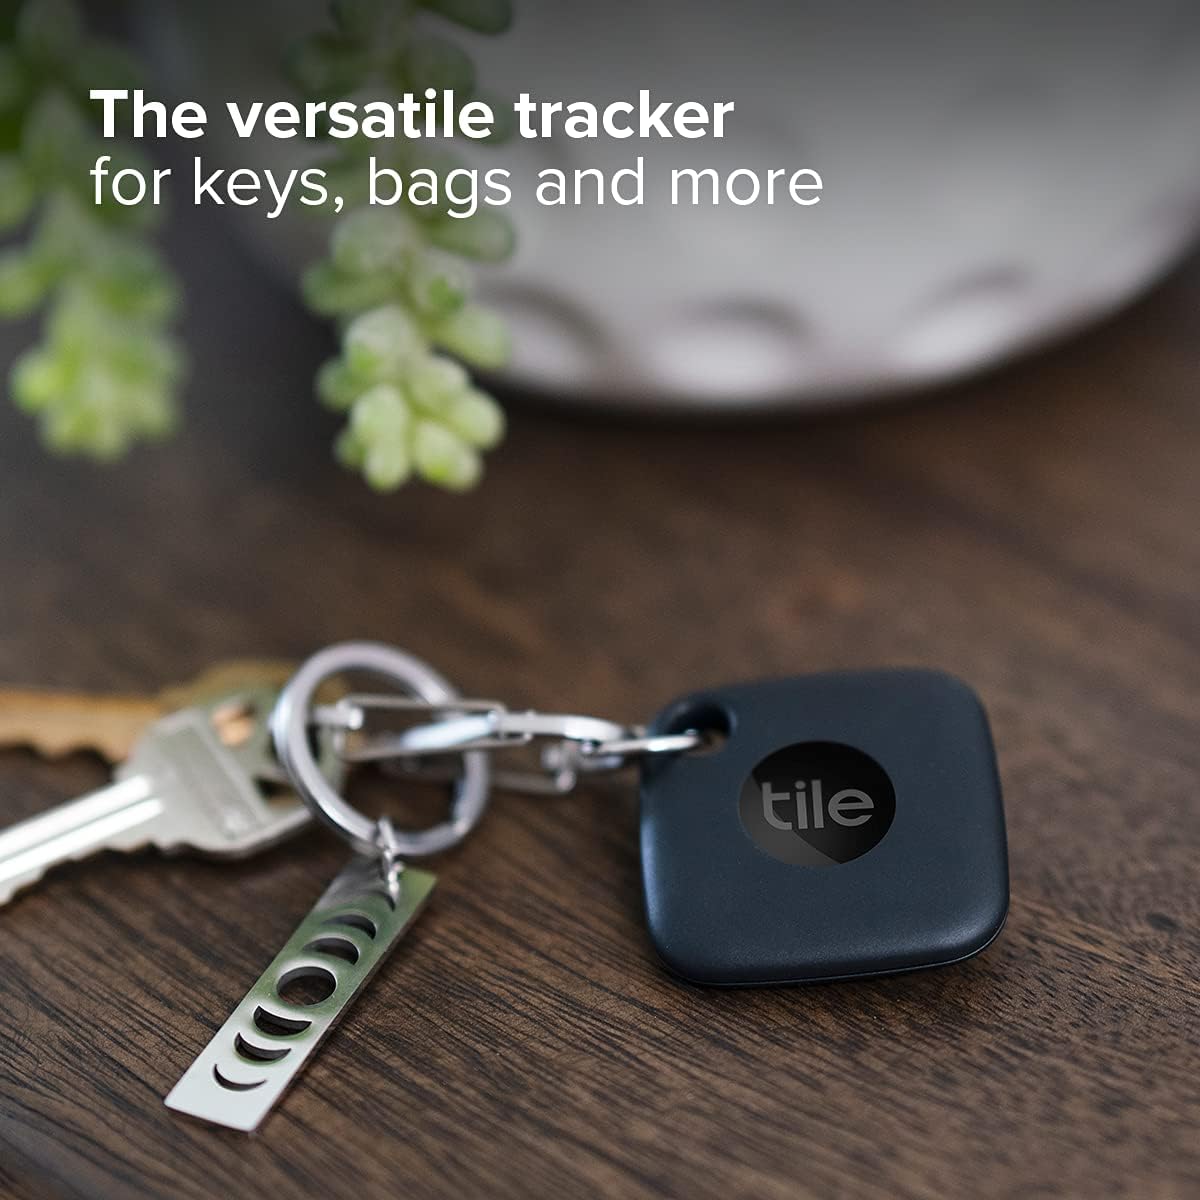 Synopsis: Tile Mate 1-Pack. Black. Bluetooth Tracker